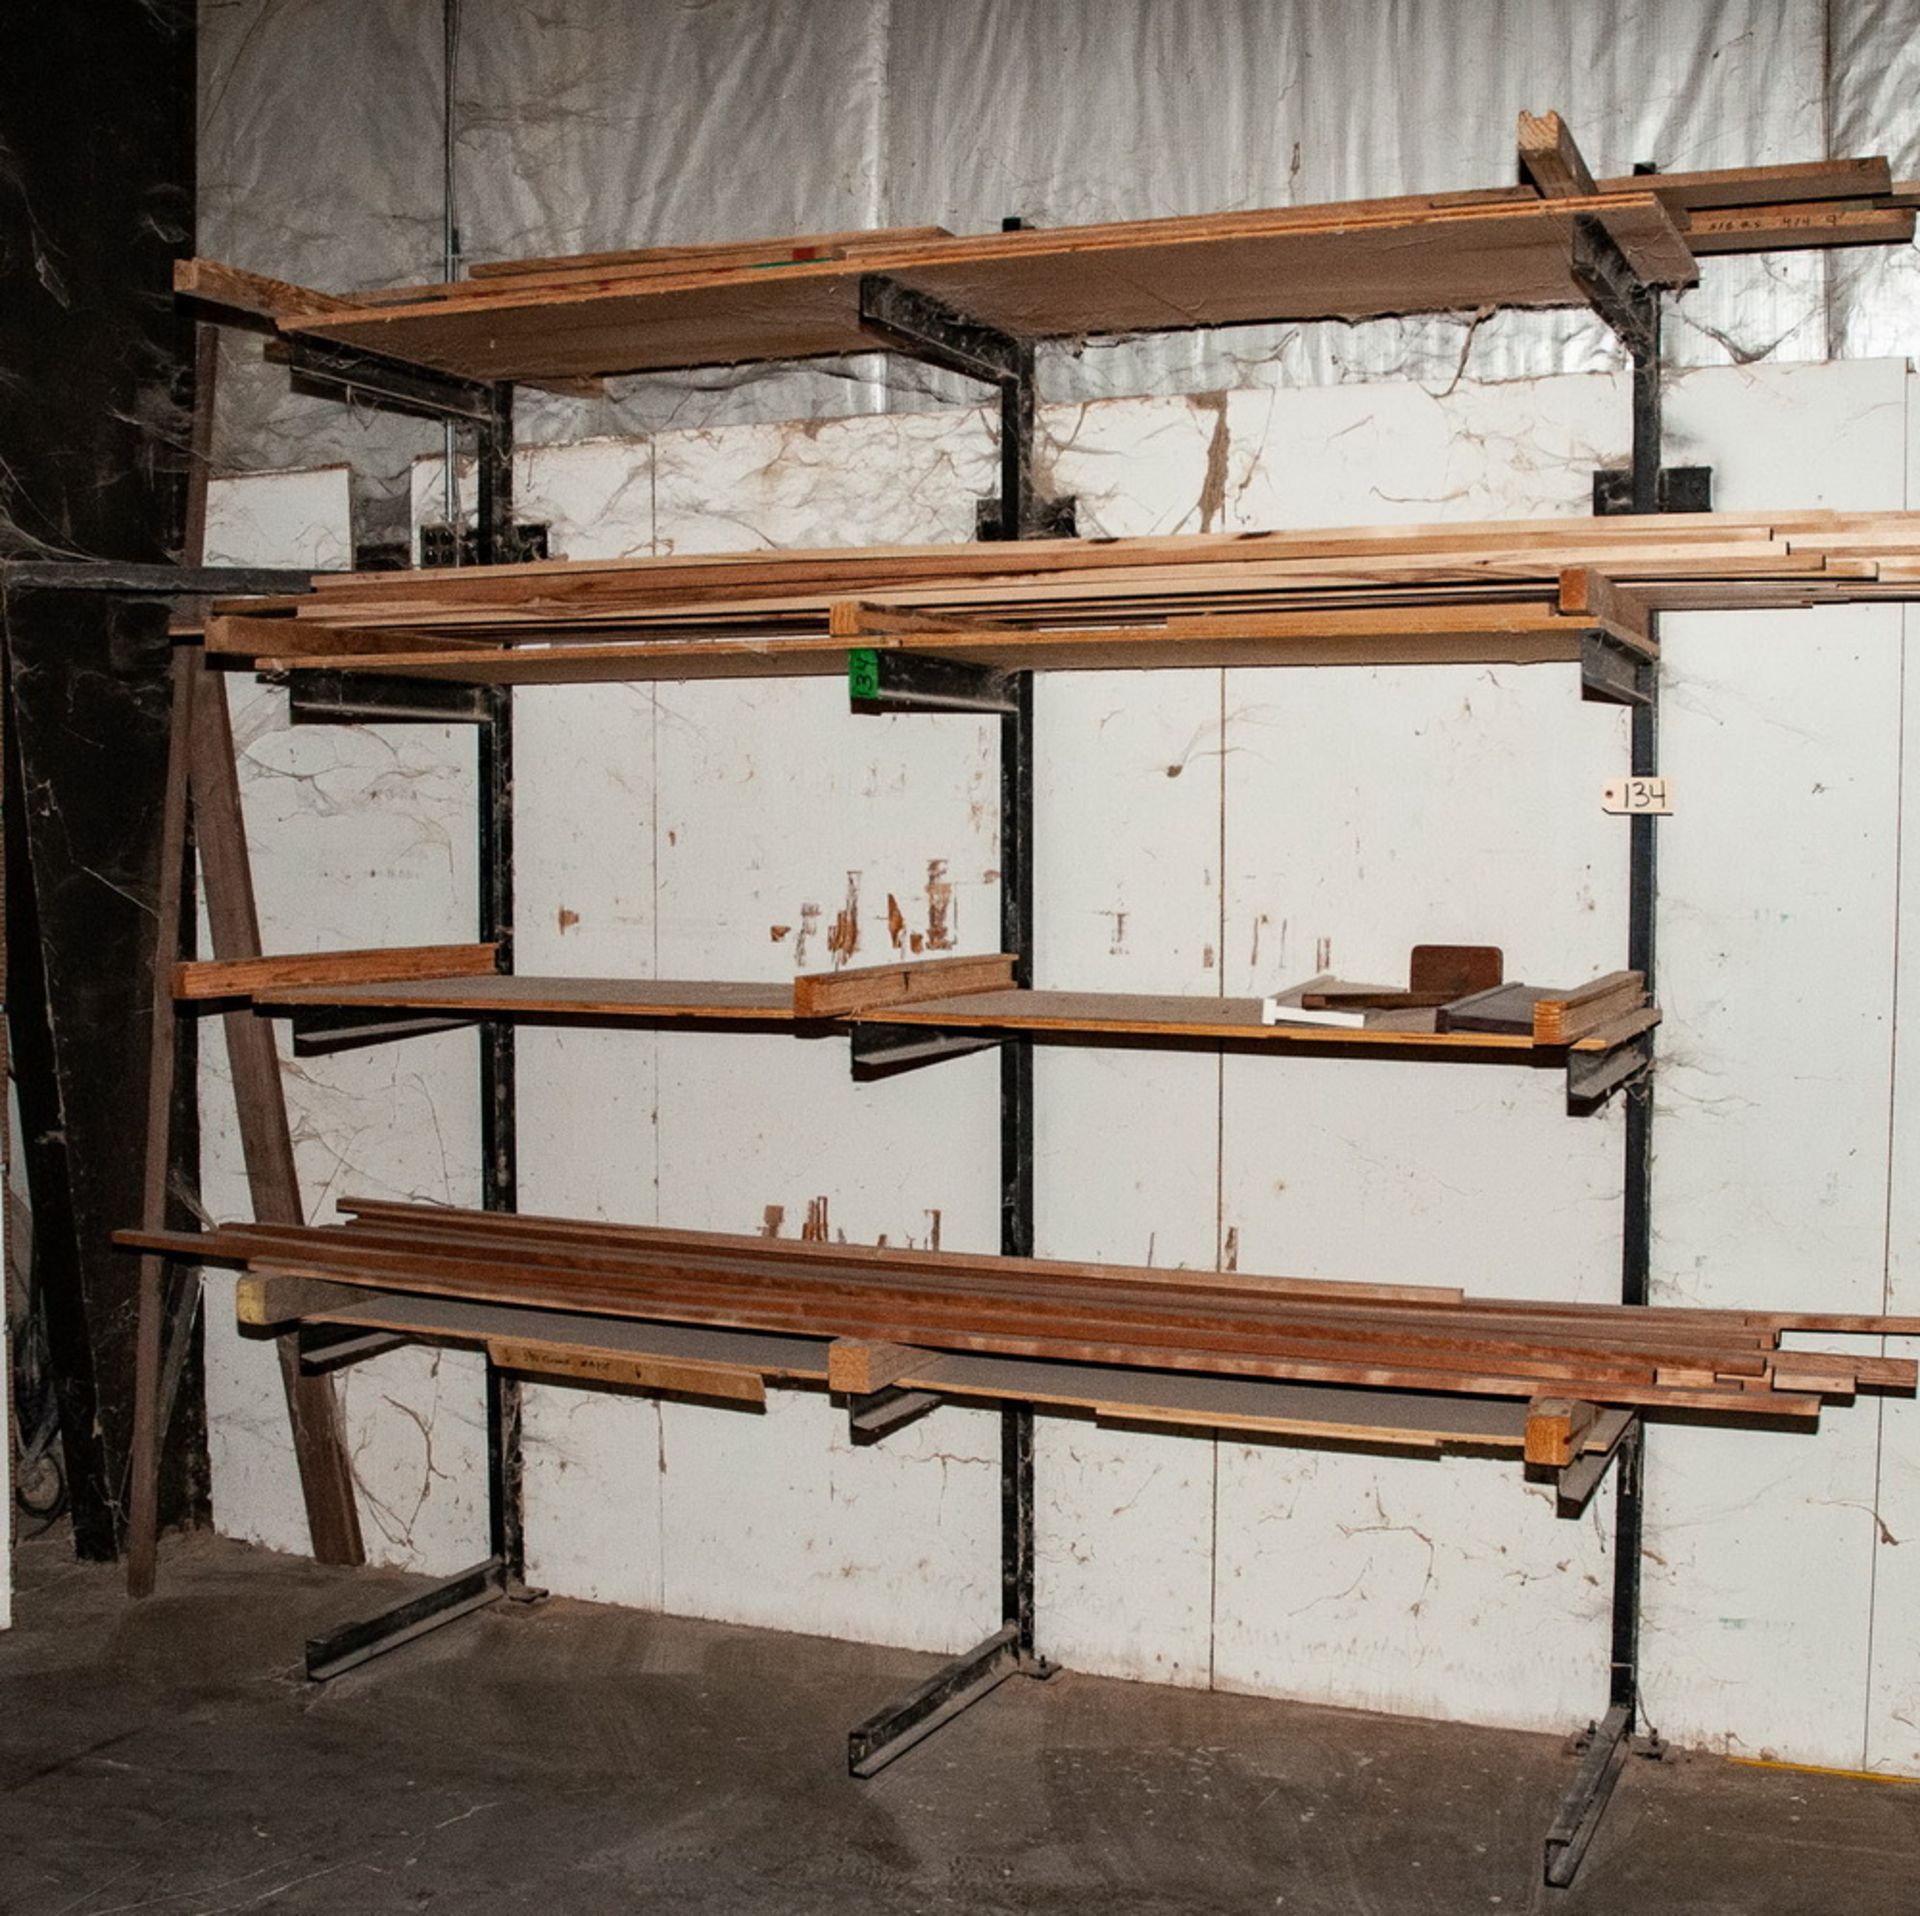 Single Sided Cantilever Rack approx. 9' Tall x 93 Inch Long, 24 Inch Arms, No Contents